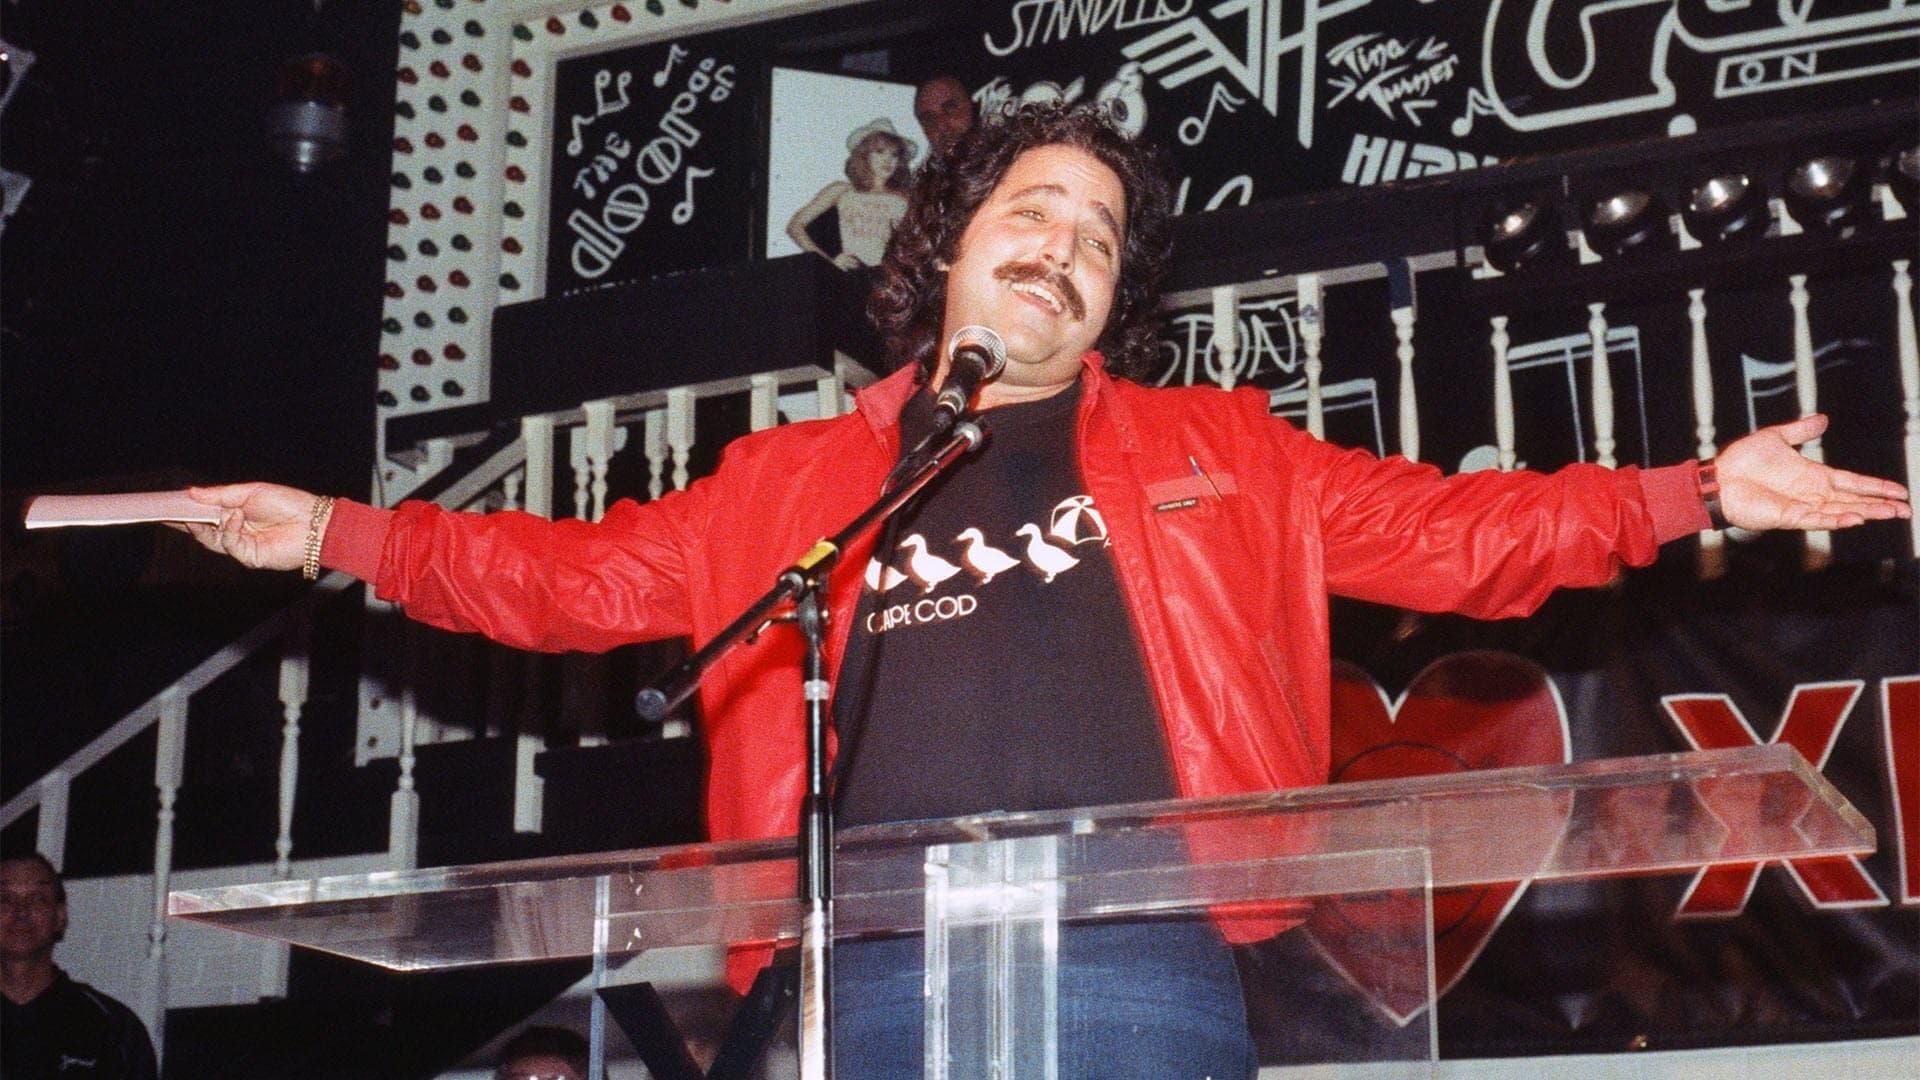 Porn King: The Rise & Fall of Ron Jeremy backdrop